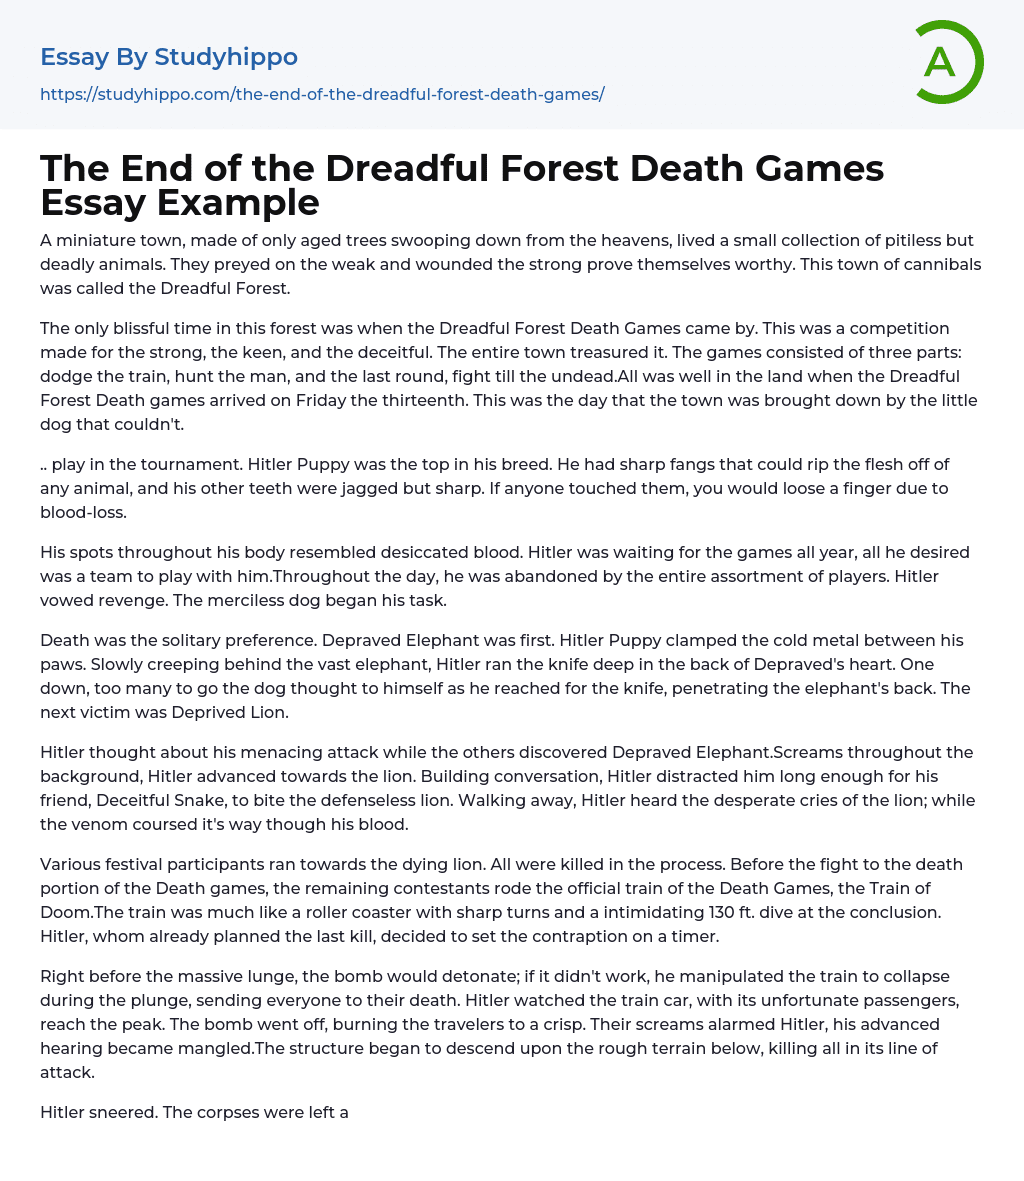 The End of the Dreadful Forest Death Games Essay Example